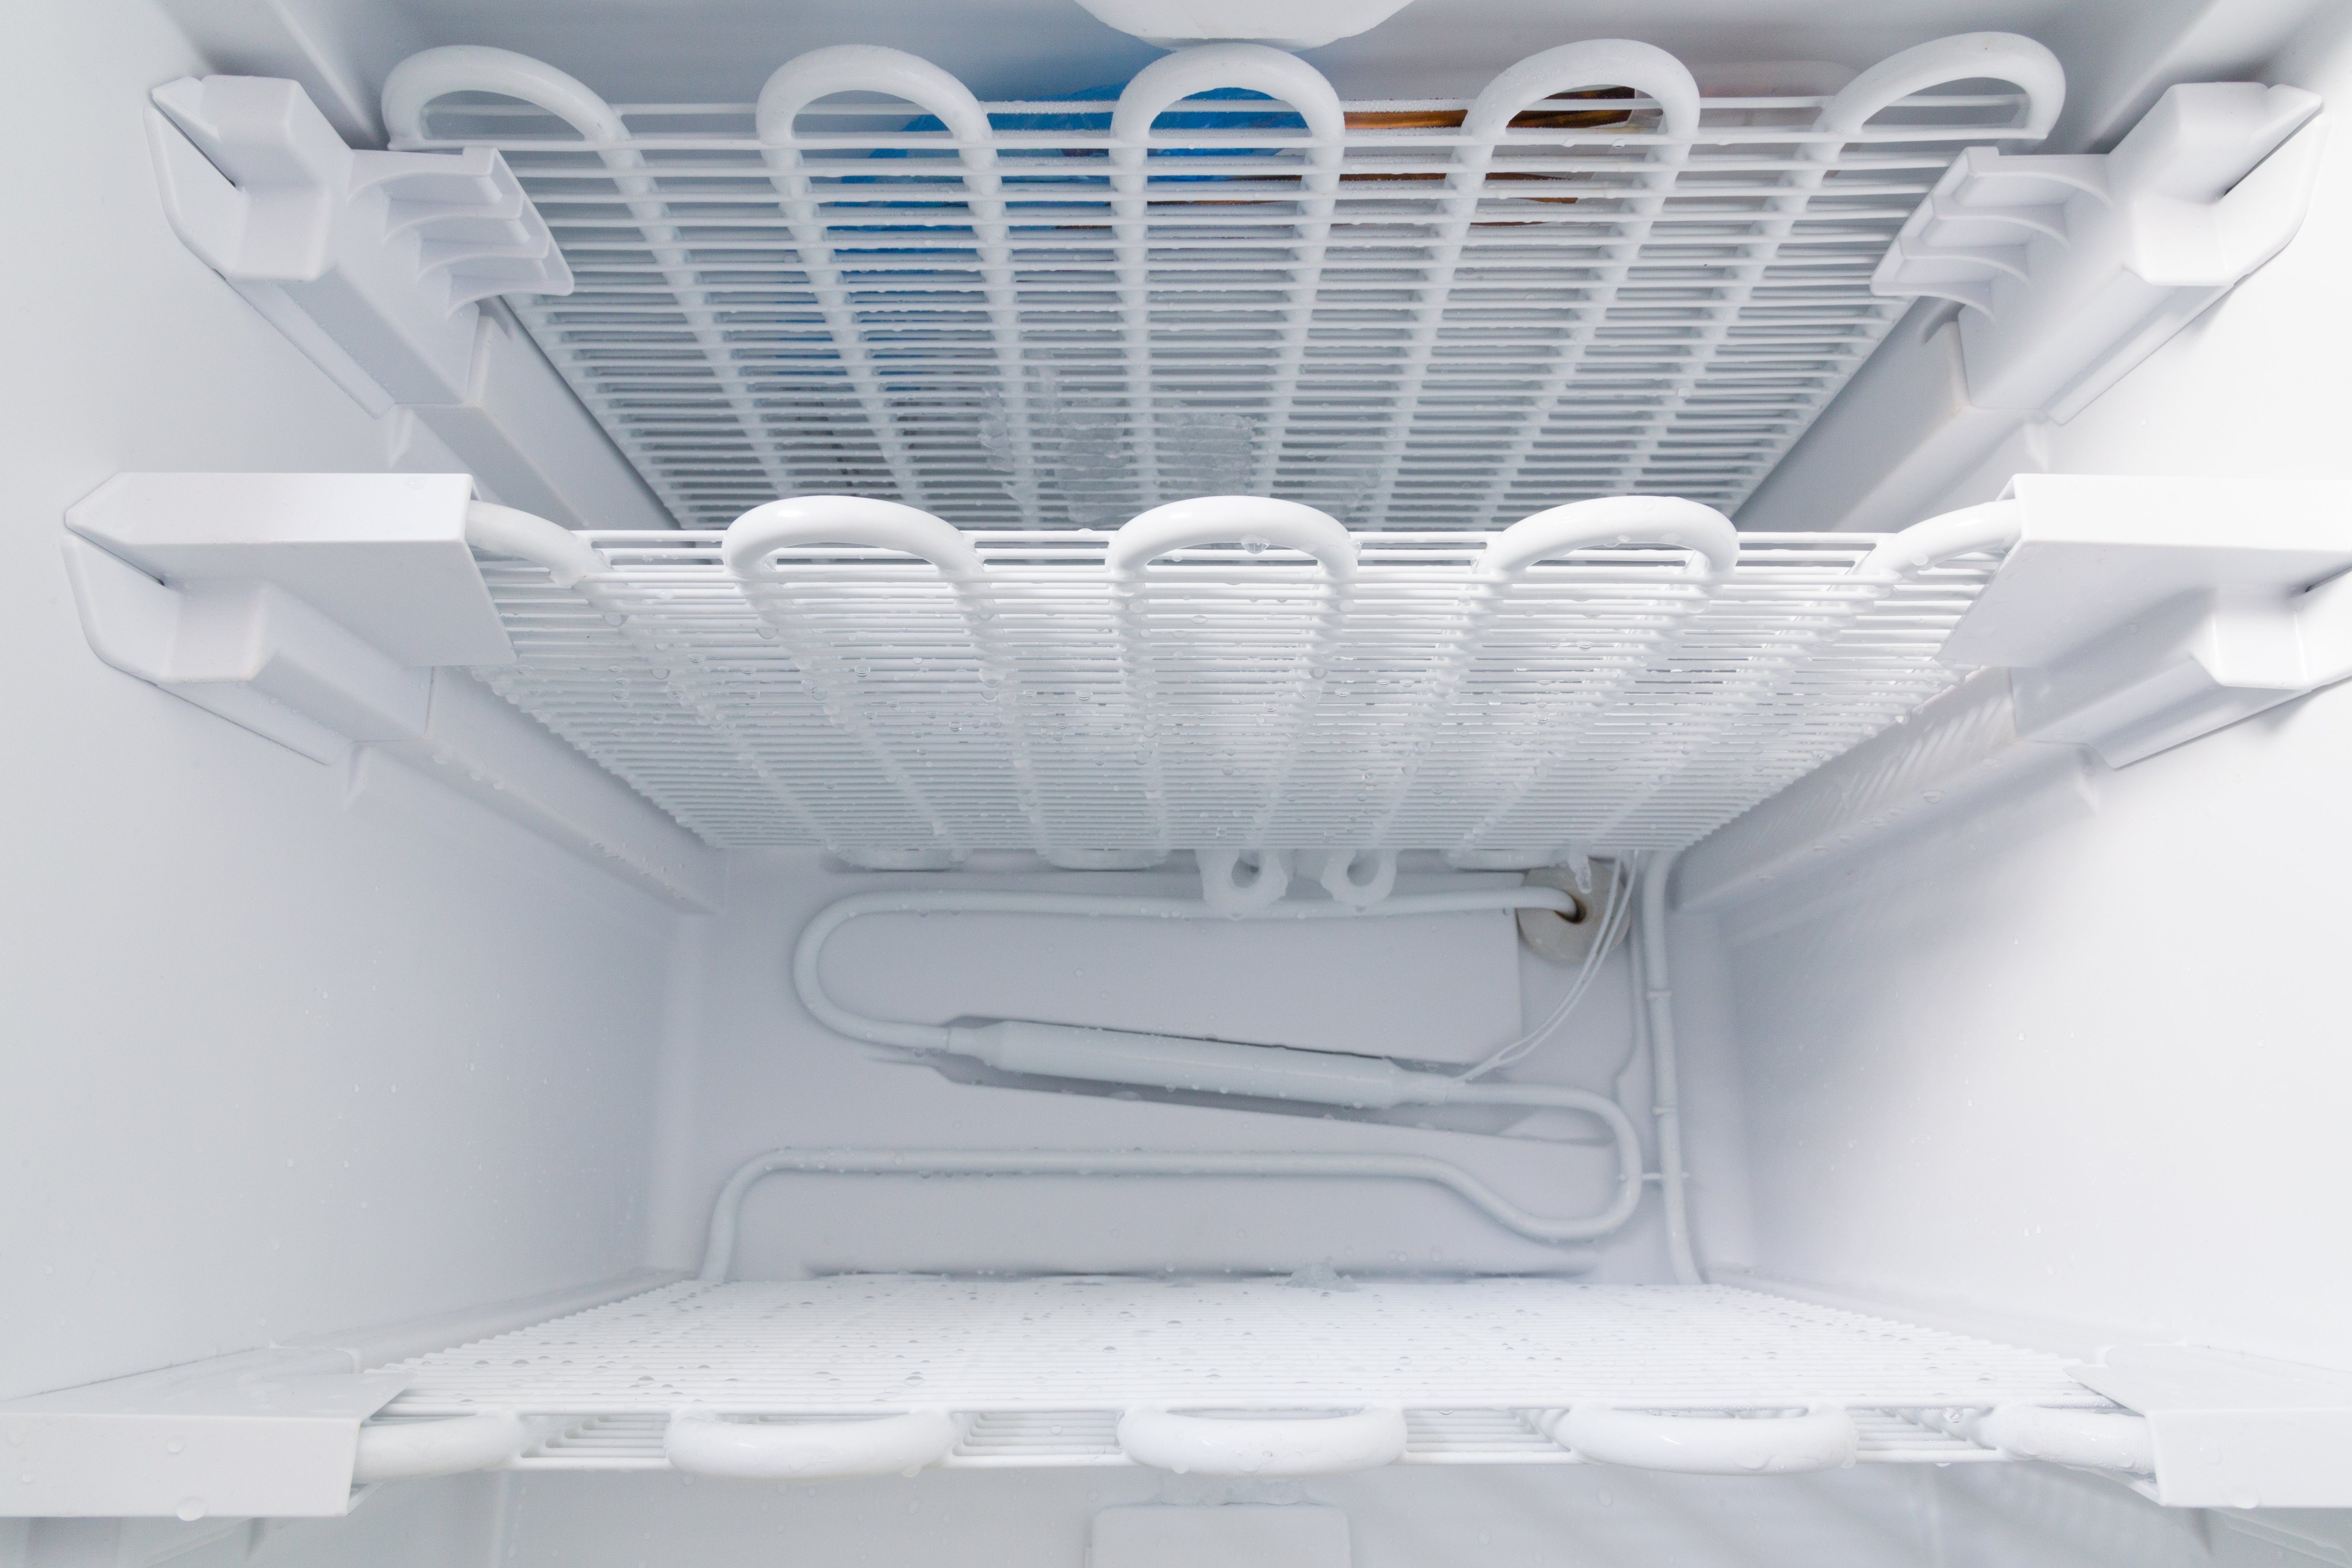 Freezer is defrosted to clean.